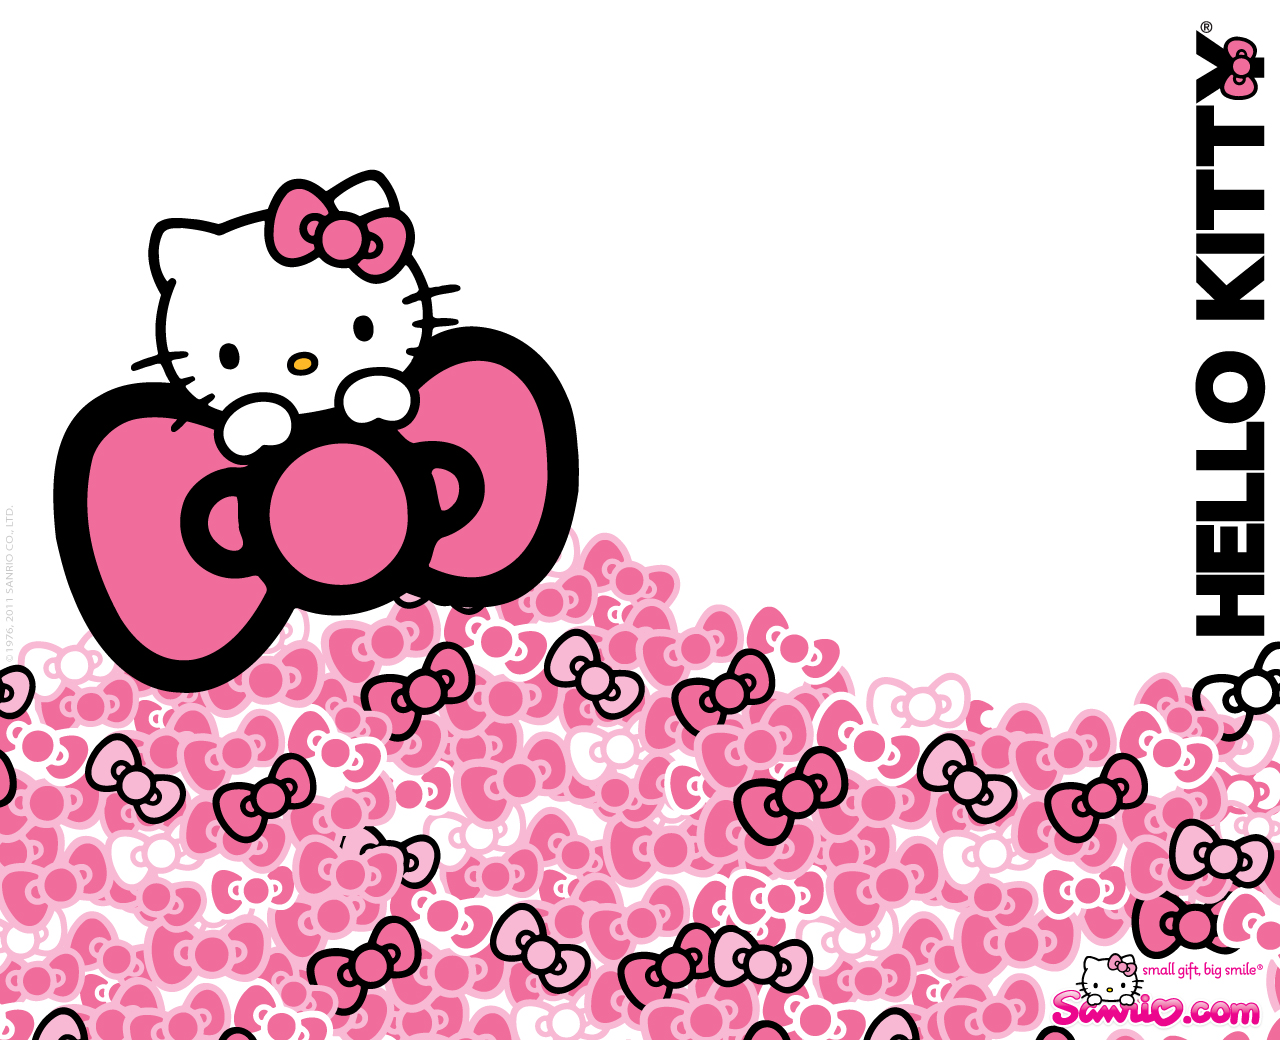 New Hello Kitty Wallpapers | Hello Kitty Wallpapers - Part 5